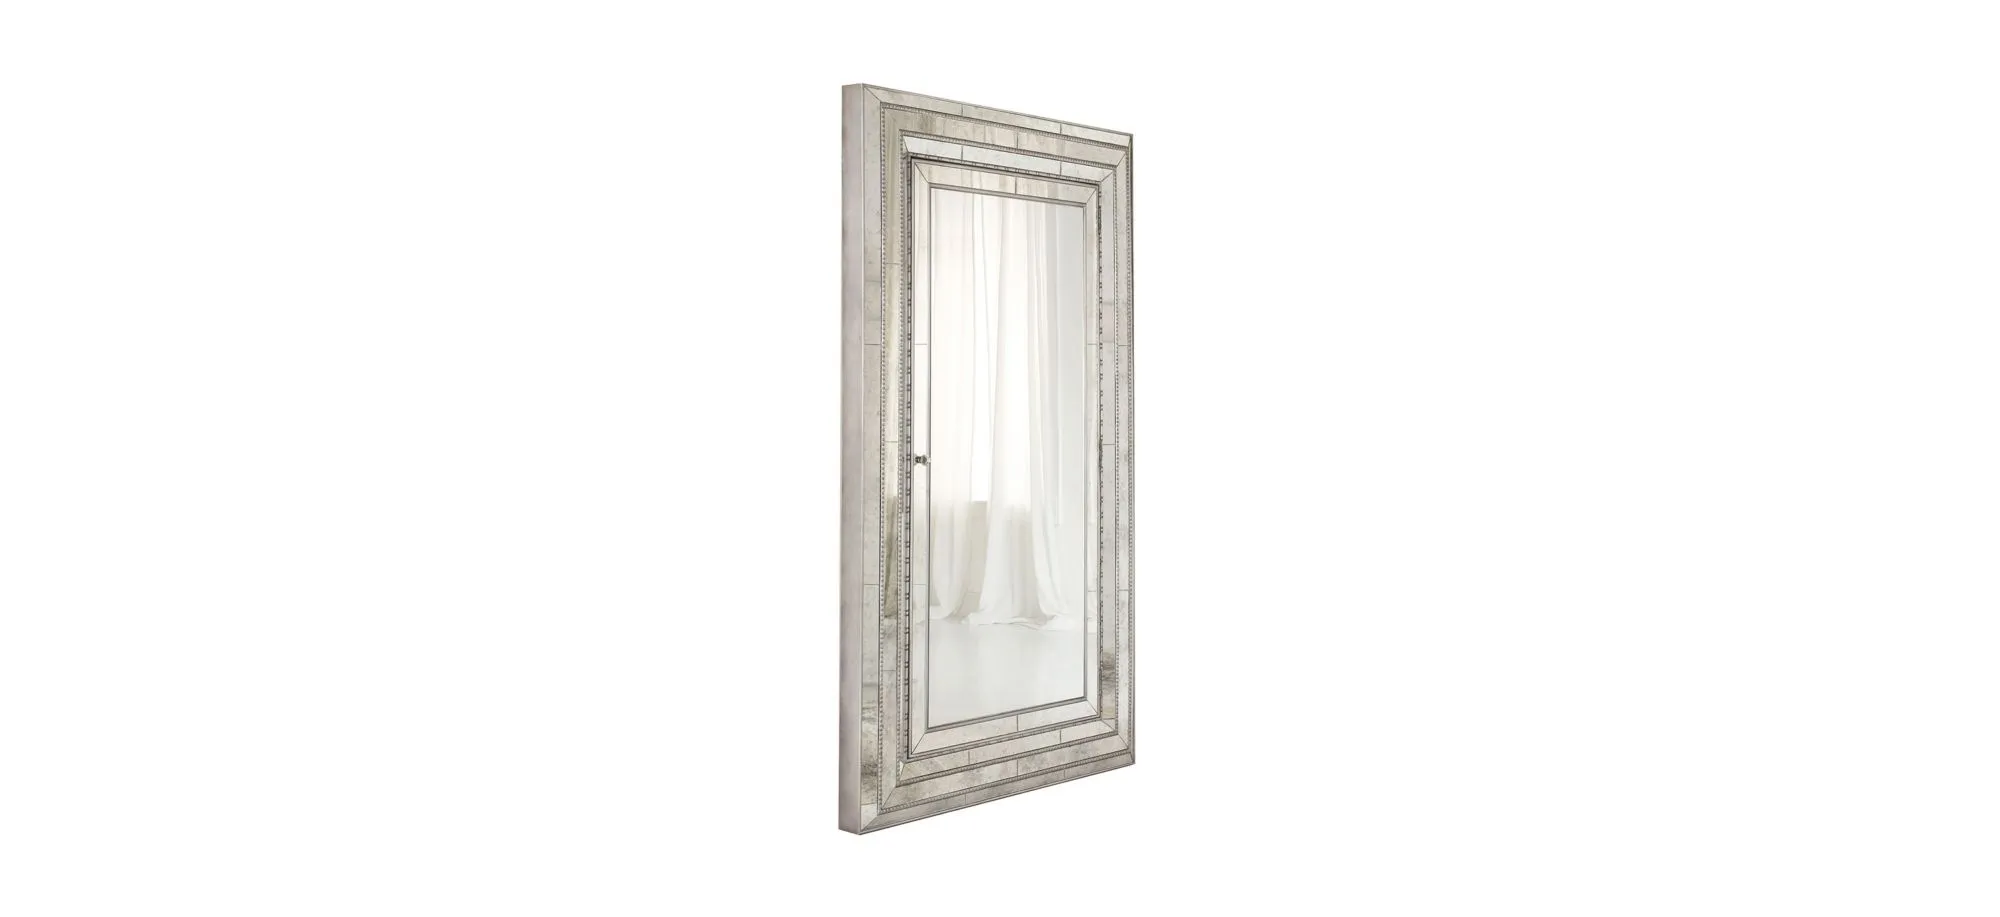 Melange Glamour Floor Mirror w/Jewelry Armoire Storage in Champagne-colored antique silver and gold by Hooker Furniture